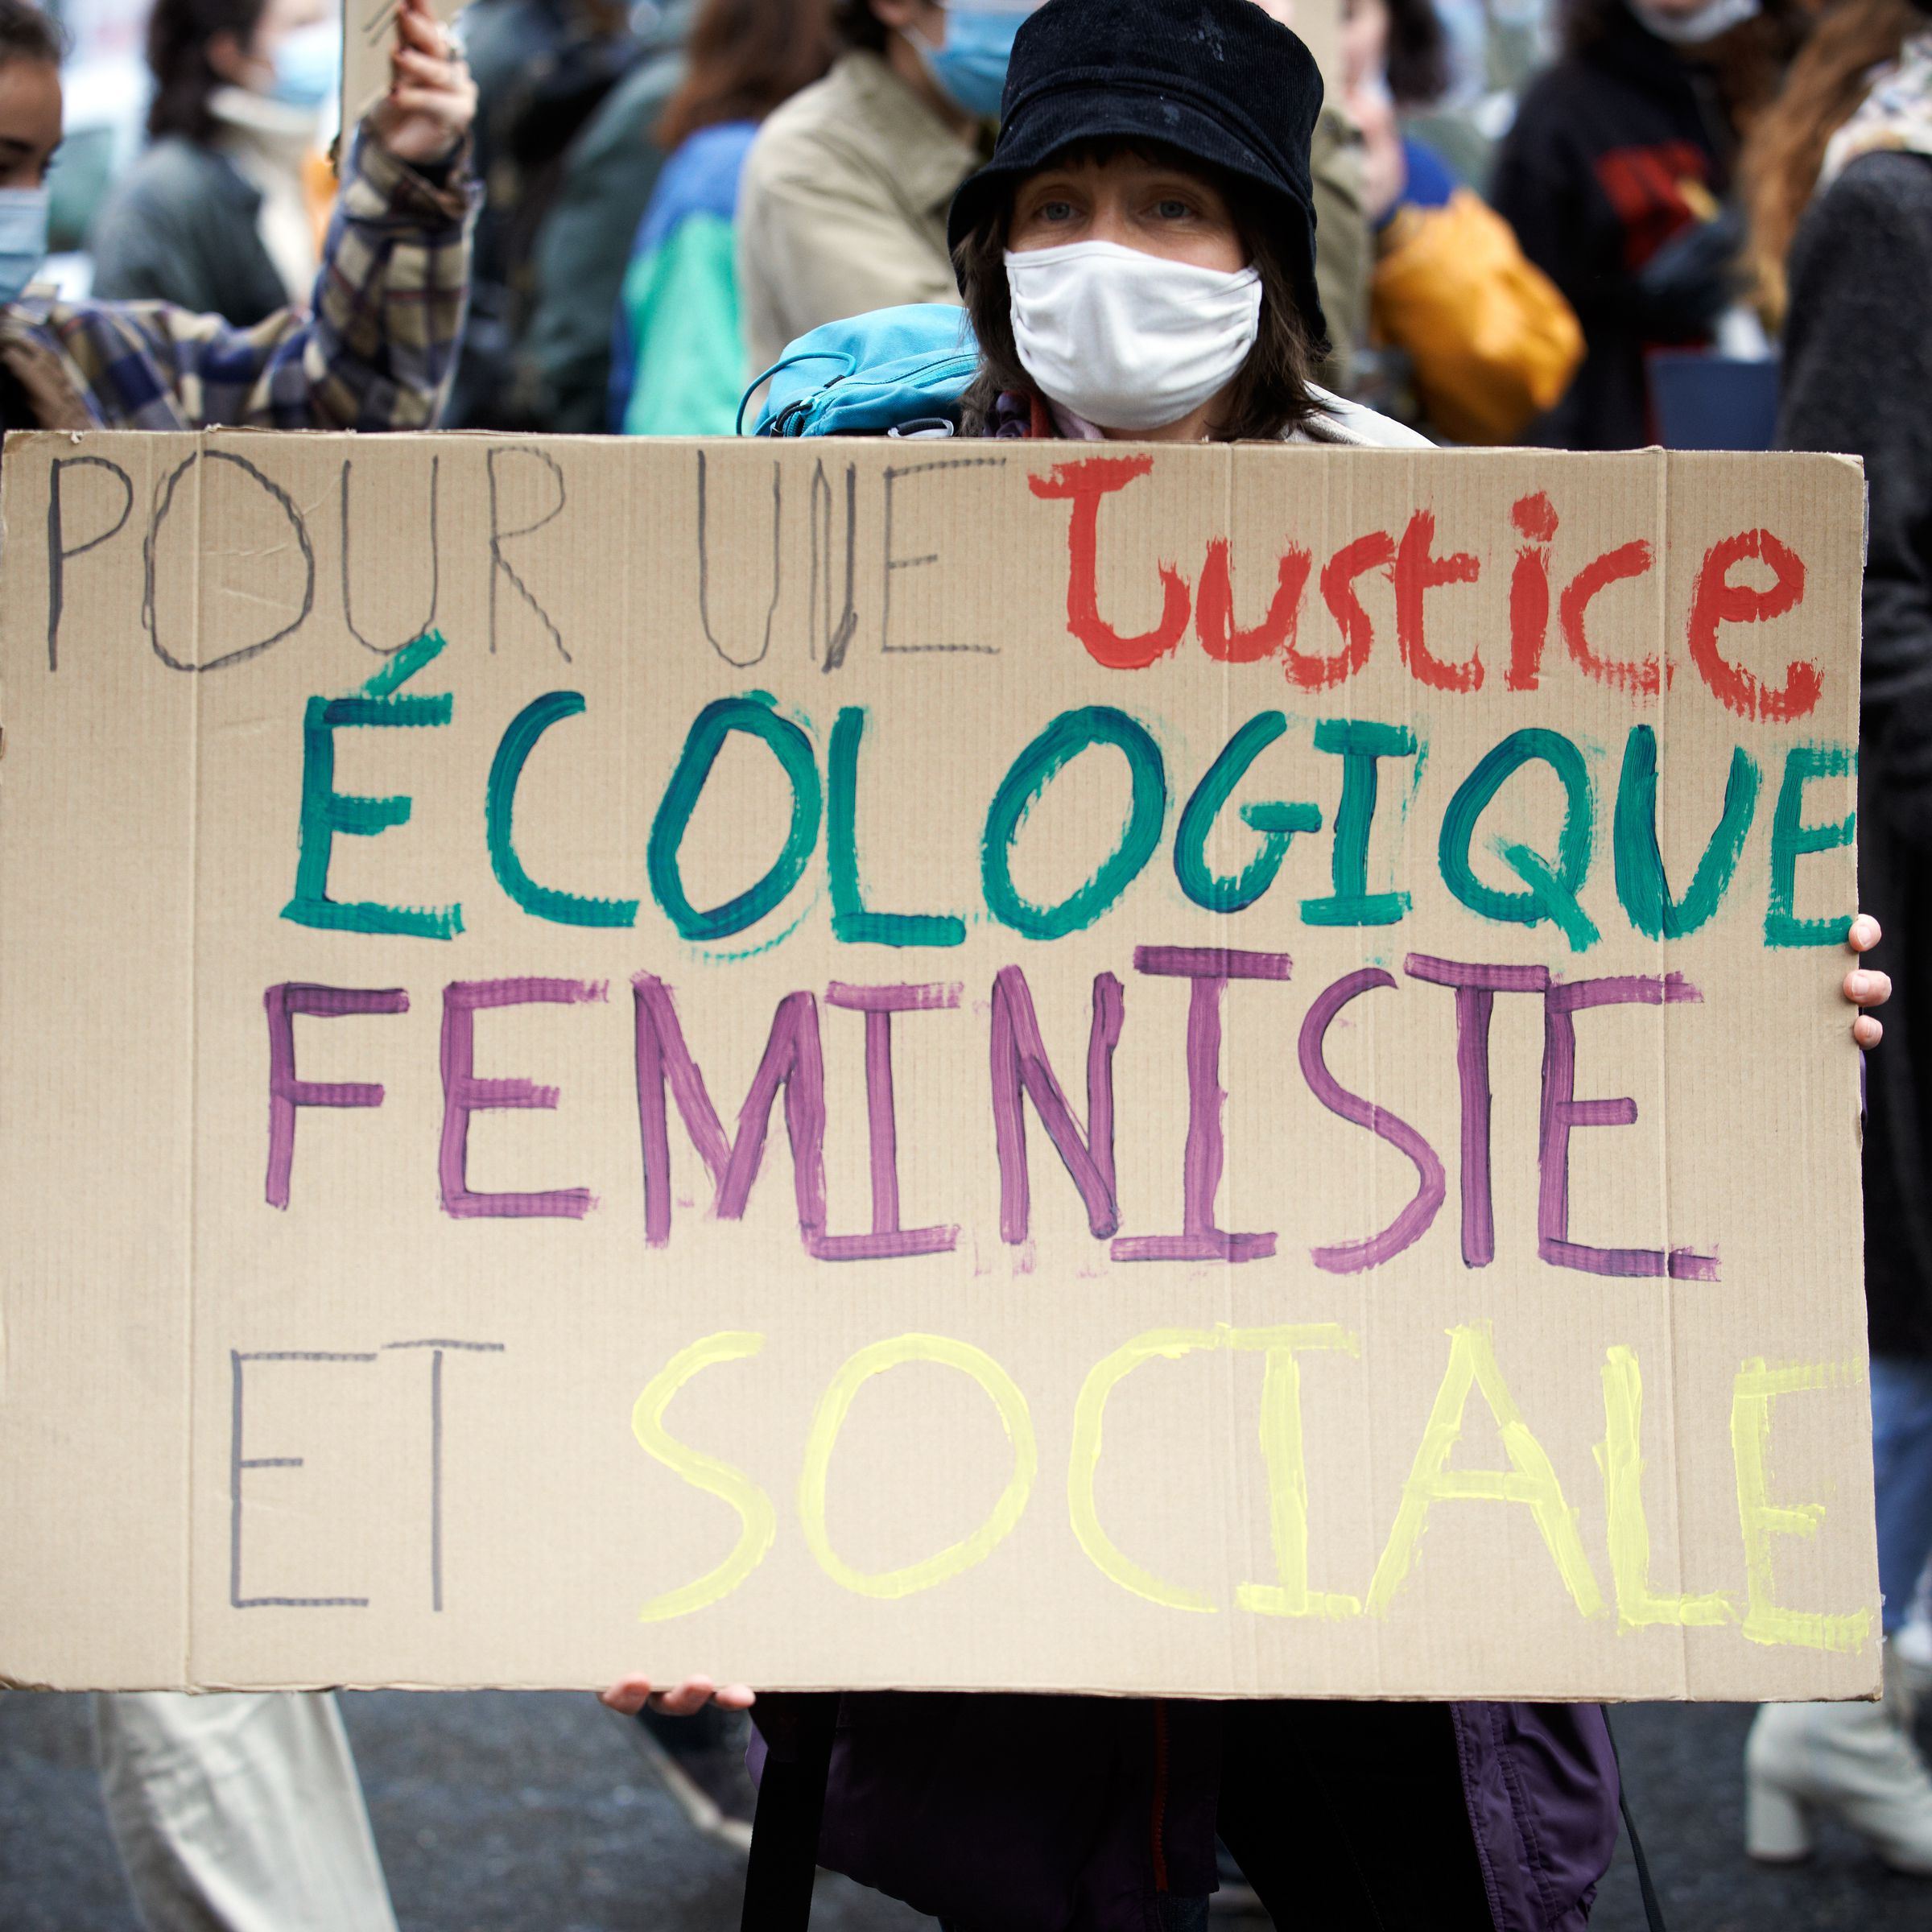 A person holds a cardboard sign with a message written in French that says, “Pour une justice ecologique feministe et sociale.”